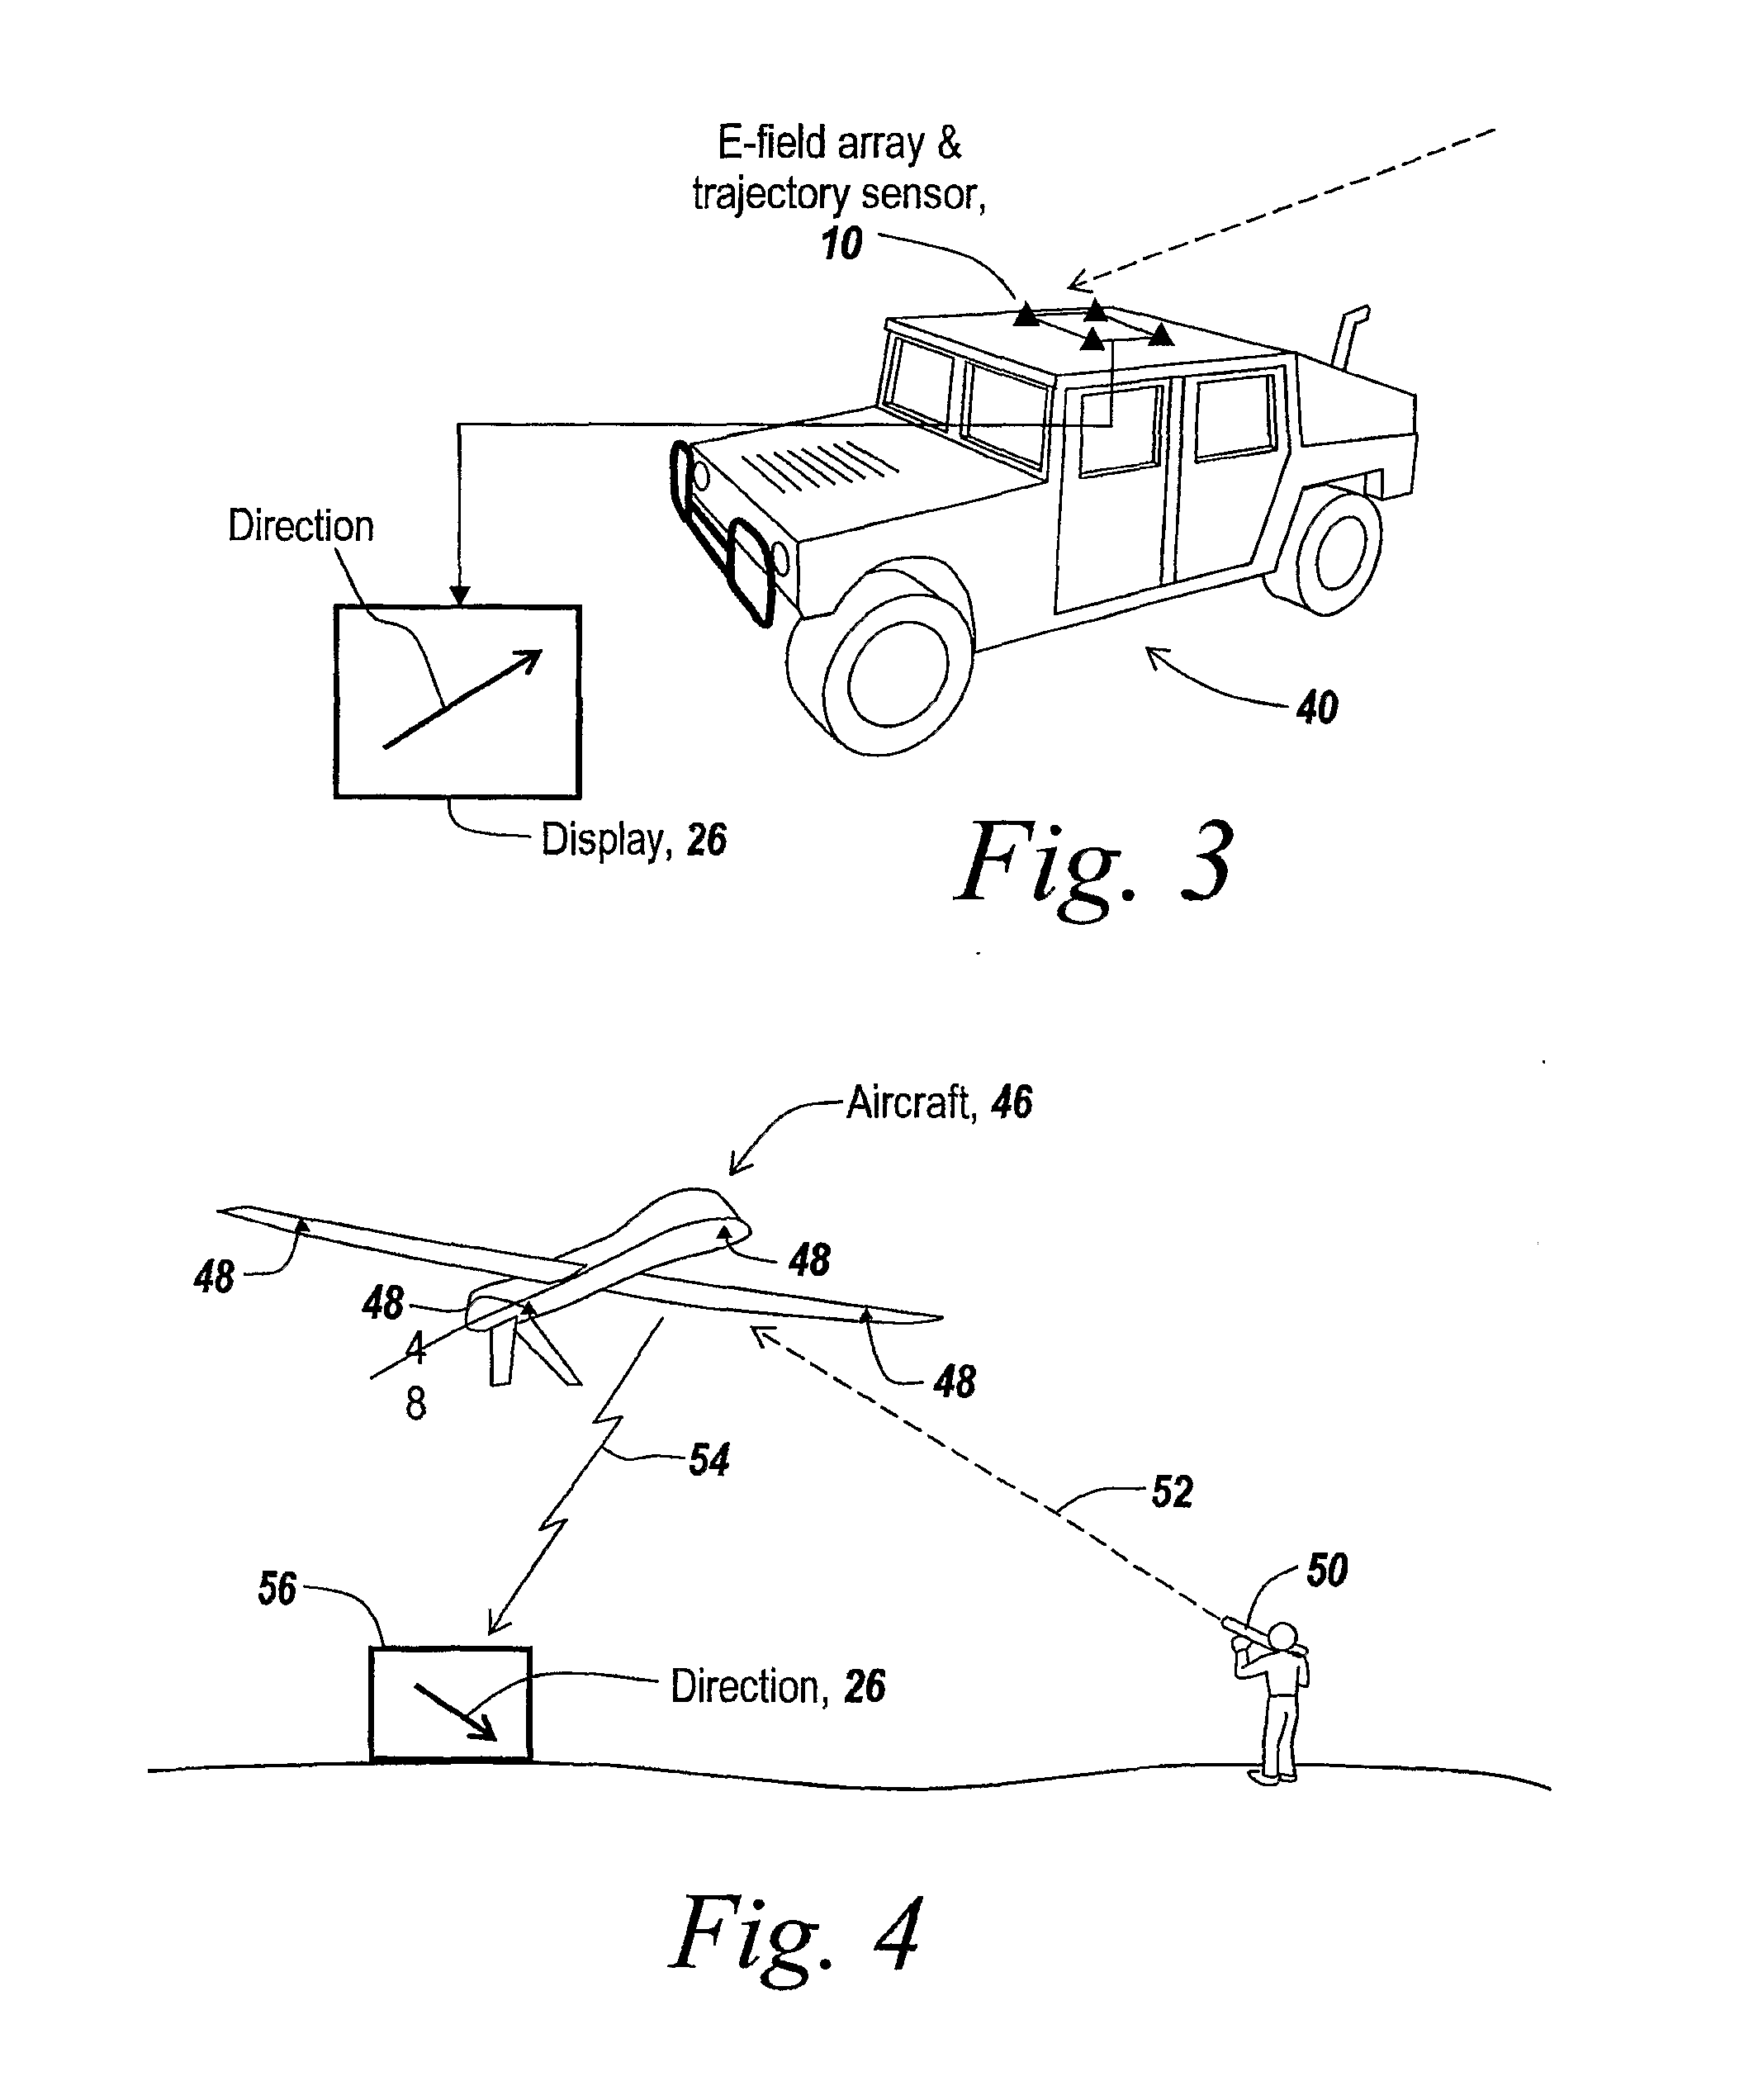 Method and Apparatus for Detecting Sources of Projectiles